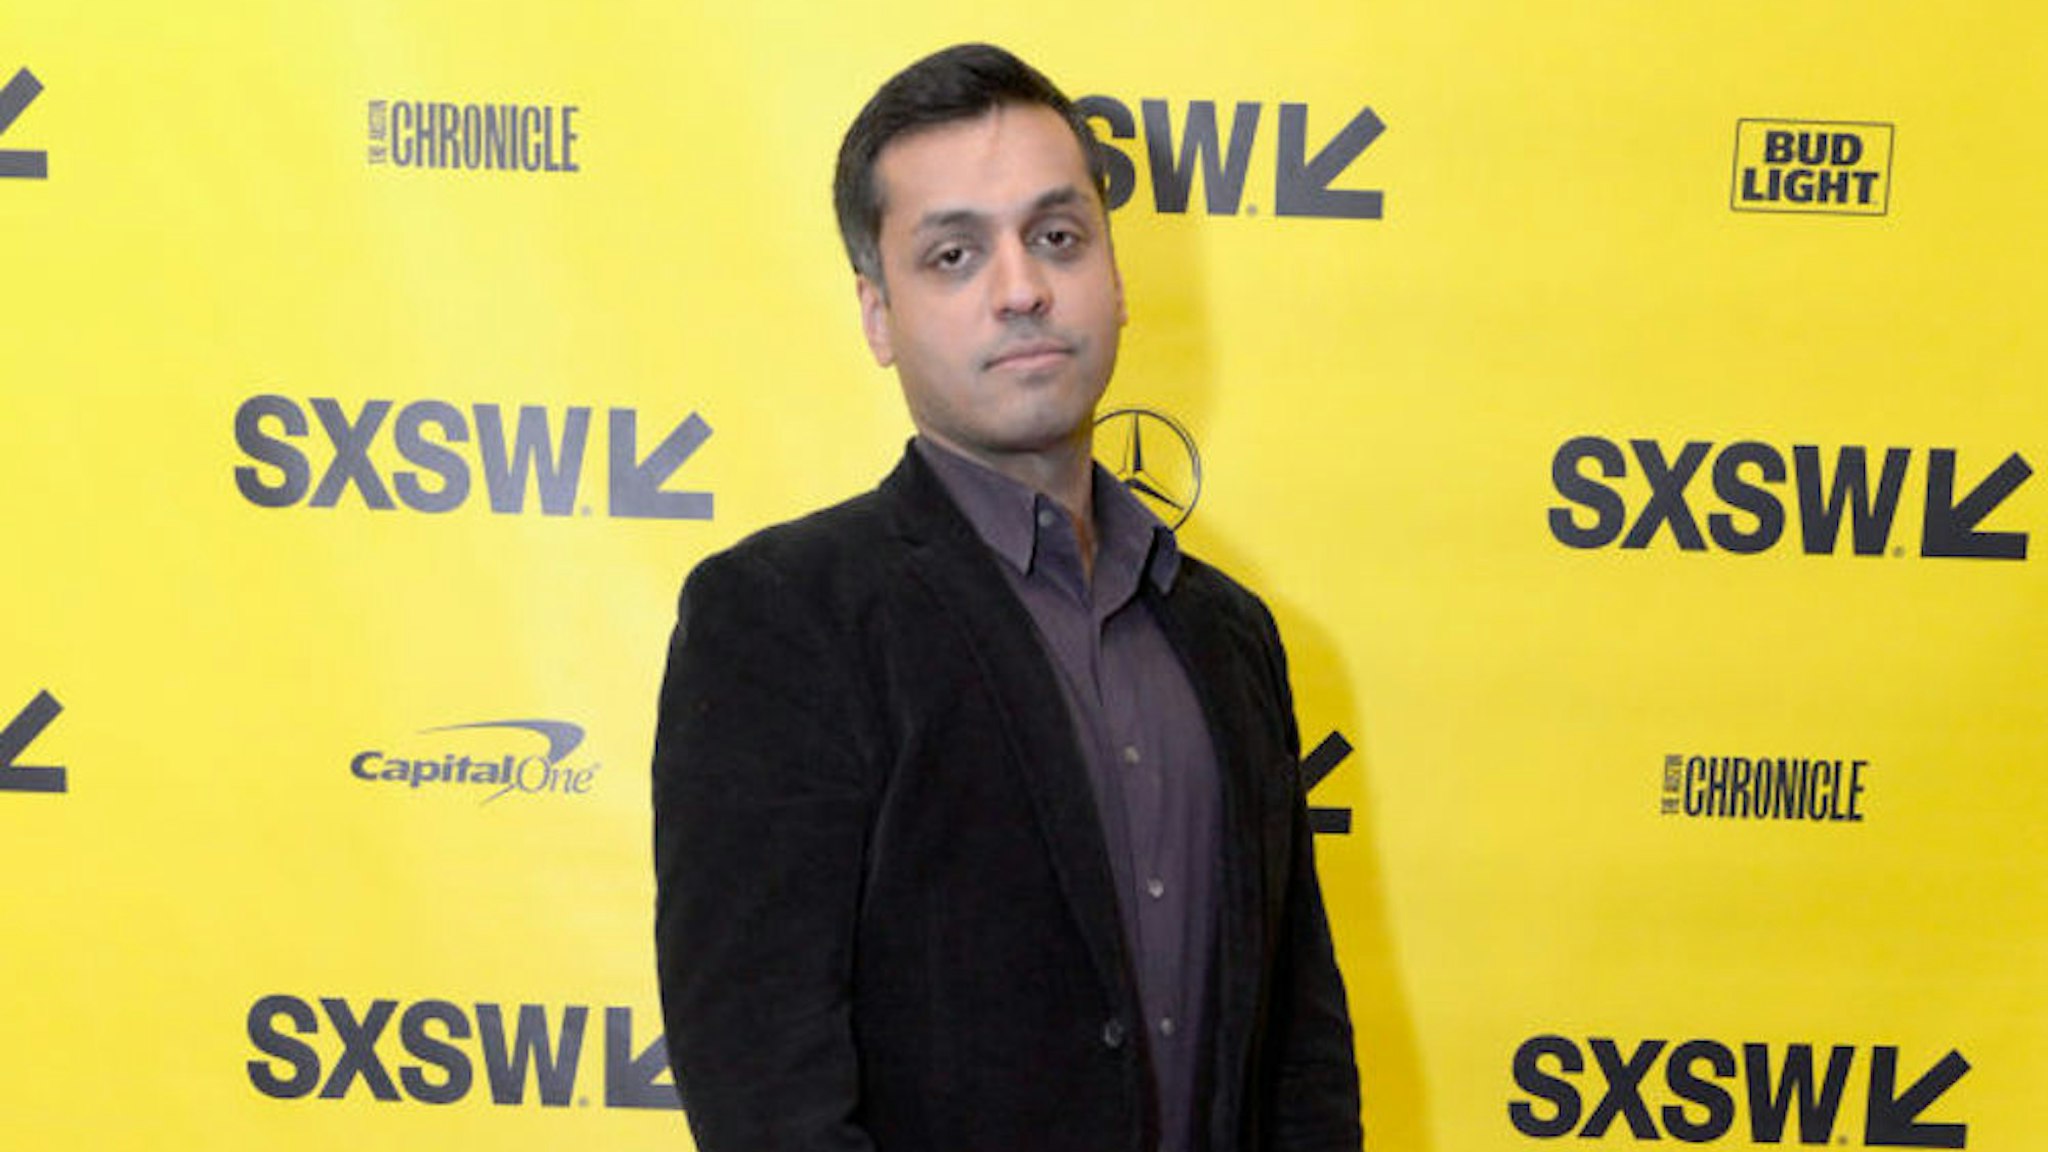 AUSTIN, TX - MARCH 11: Wajahat Ali attends Katie Couric podcast LIVE: The Muslim Next Door during SXSW at Austin Convention Center on March 11, 2018 in Austin, Texas. (Photo by Nicola Gell/Getty Images for SXSW)